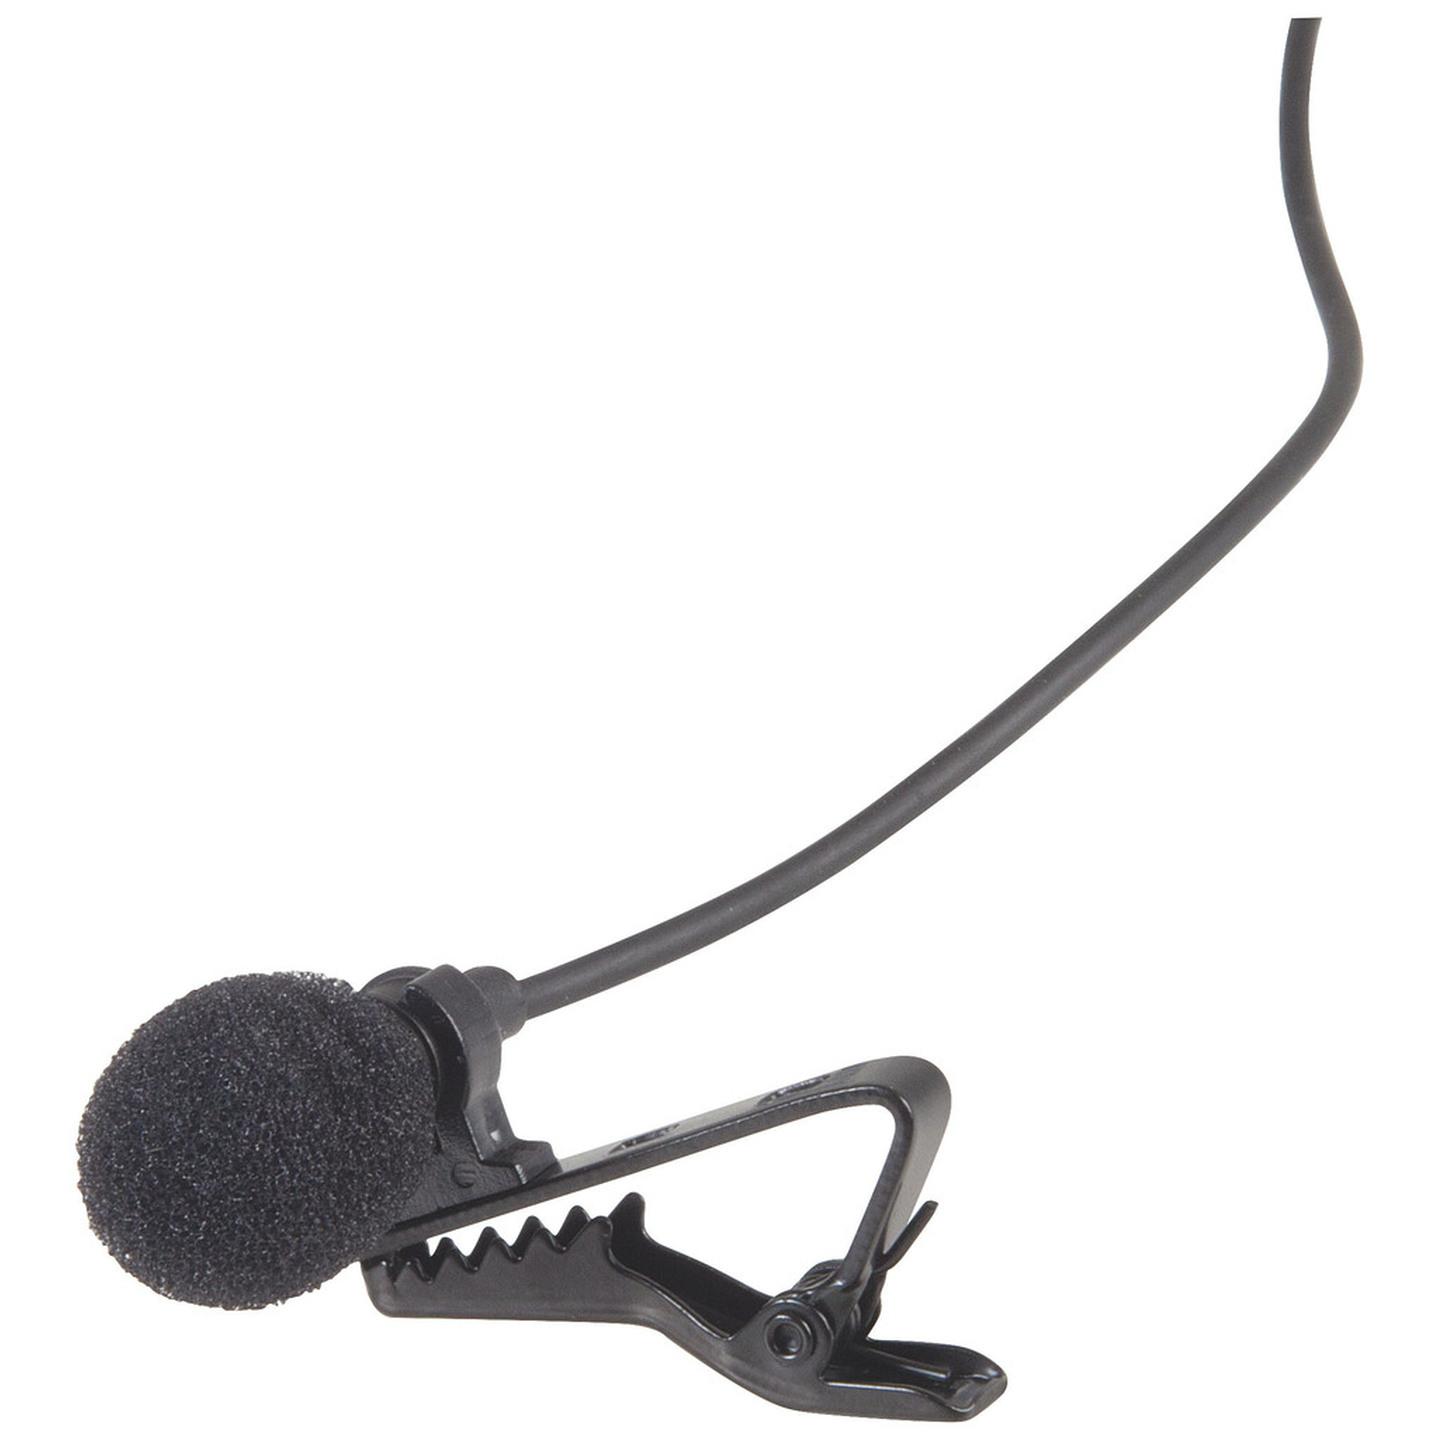 Digitech Stereo Lapel Microphone with Headphone Outlet